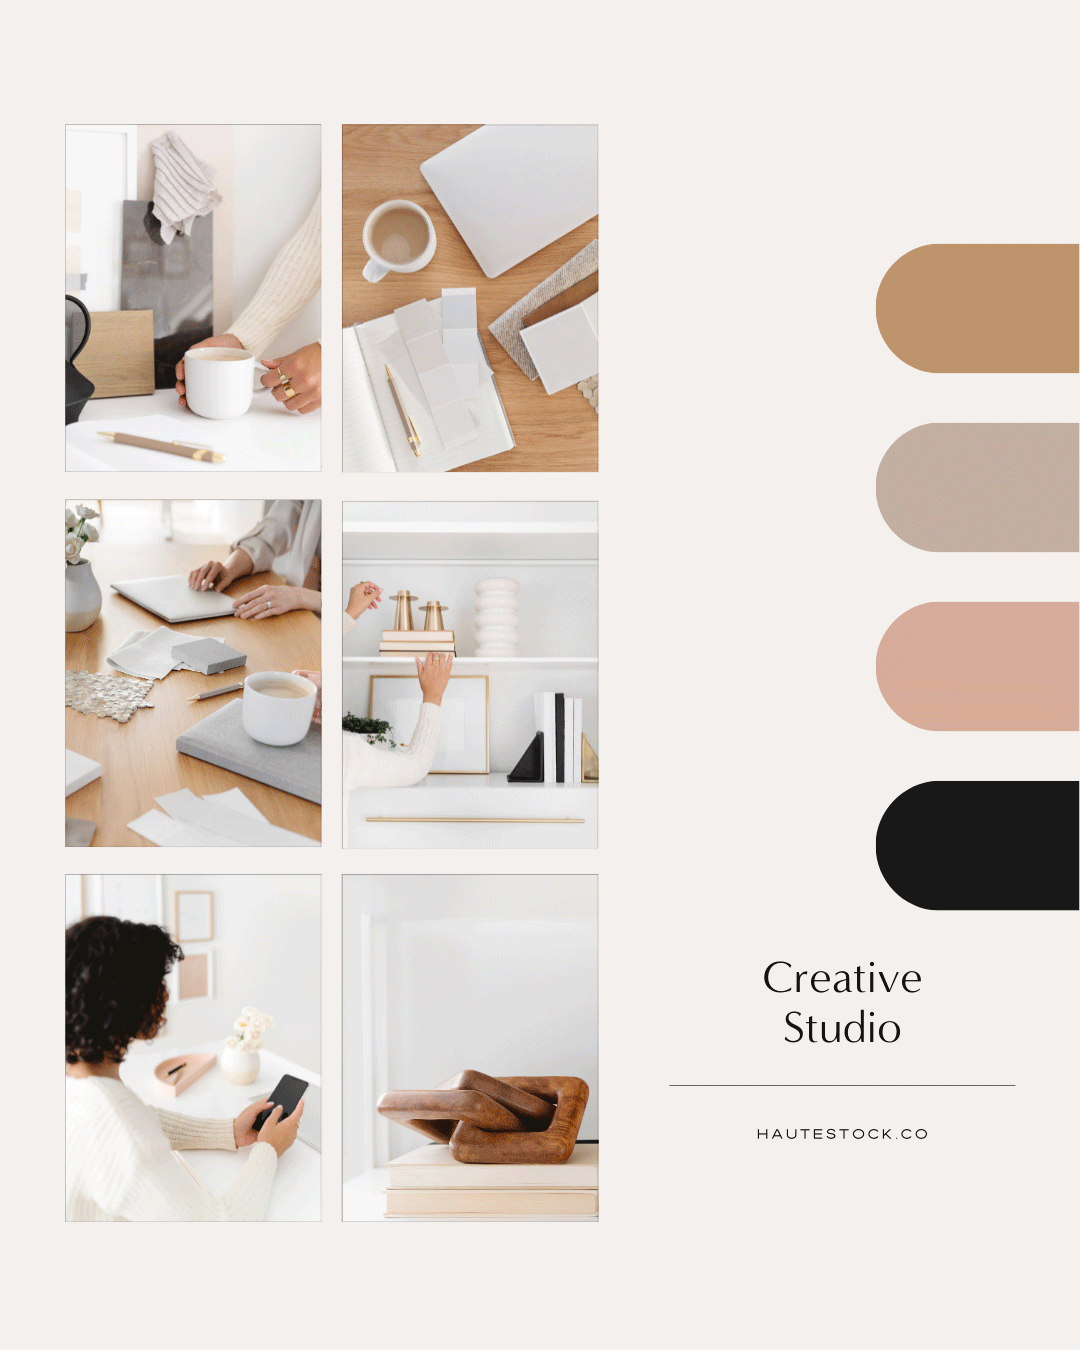 Light & airy creative workspace stock photography mood board featuring interior styling, design workspaces, mood boards and feminine workspaces.